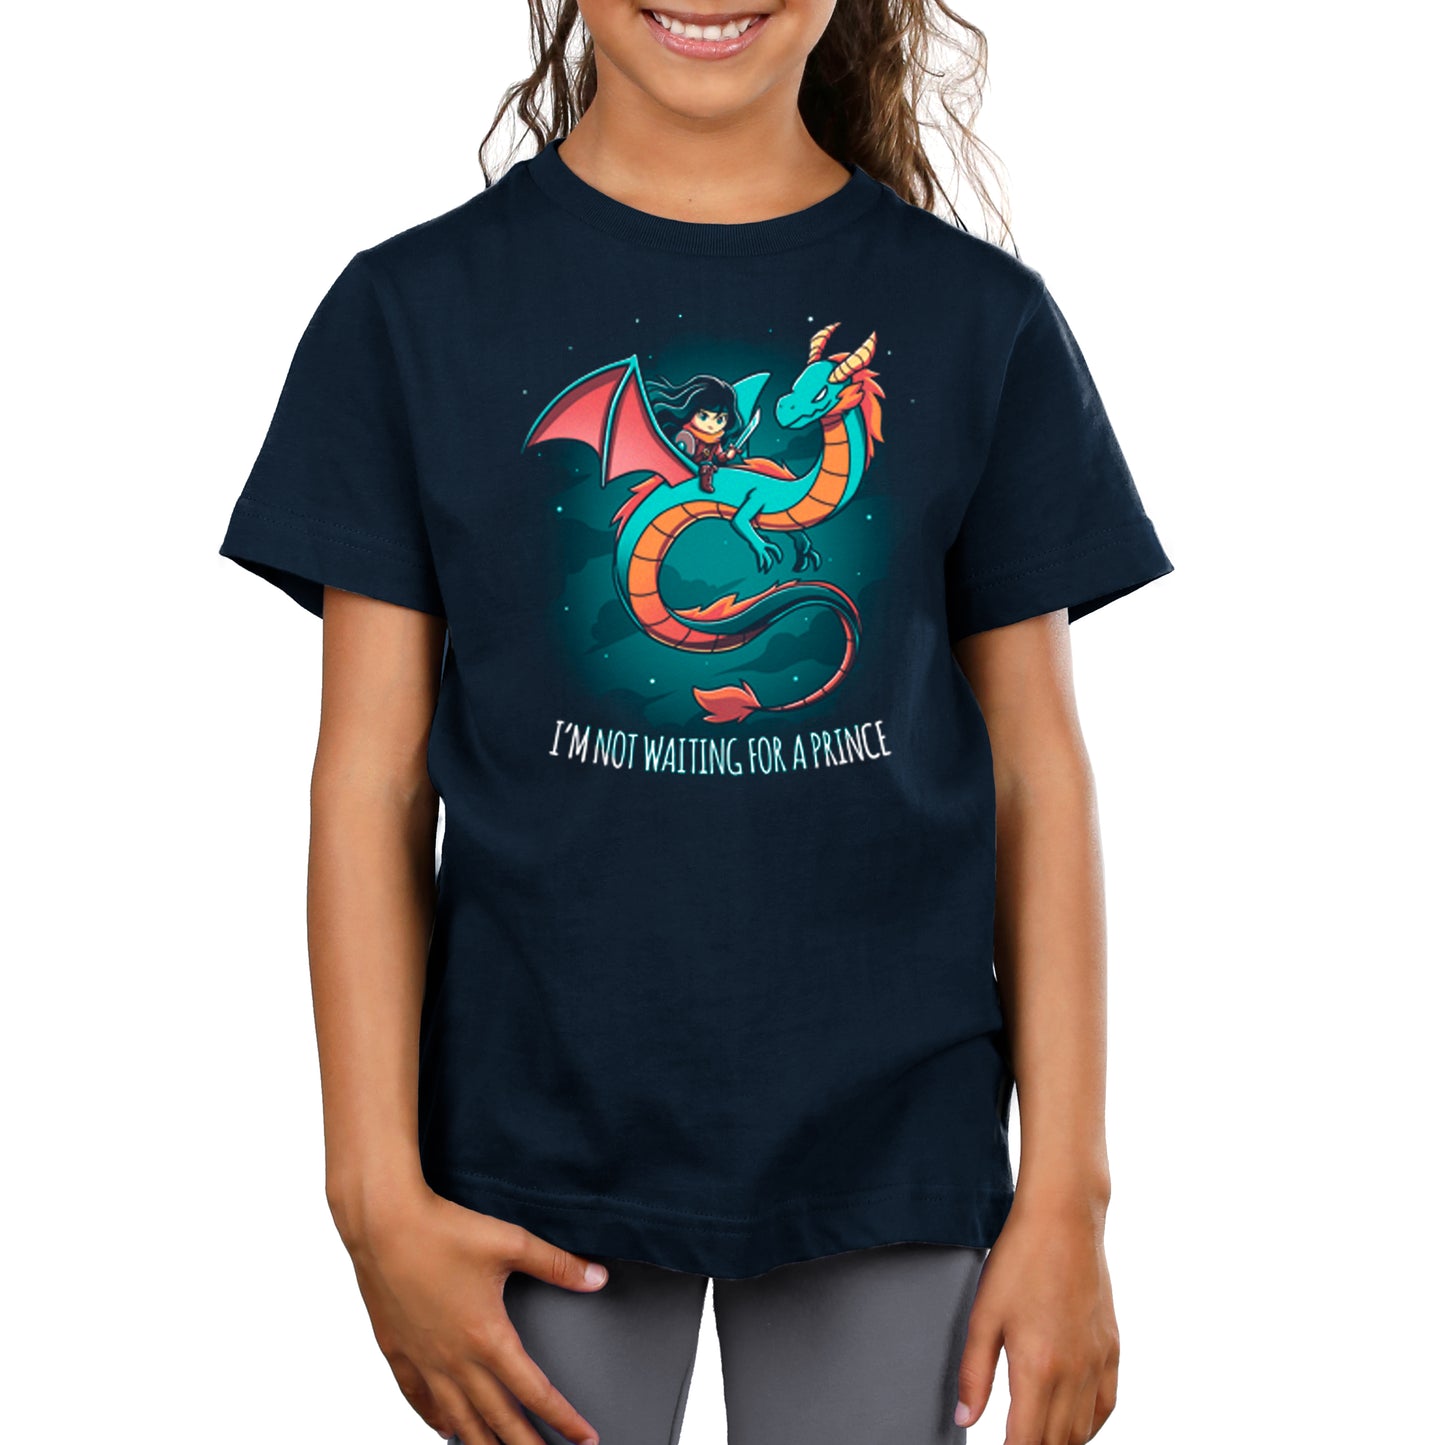 A child proudly wears a navy blue t-shirt featuring a fierce dragon design with the text "I'm not waiting for a prince." This stylish "I'm Not Waiting for a Prince" t-shirt by monsterdigital makes a bold statement.